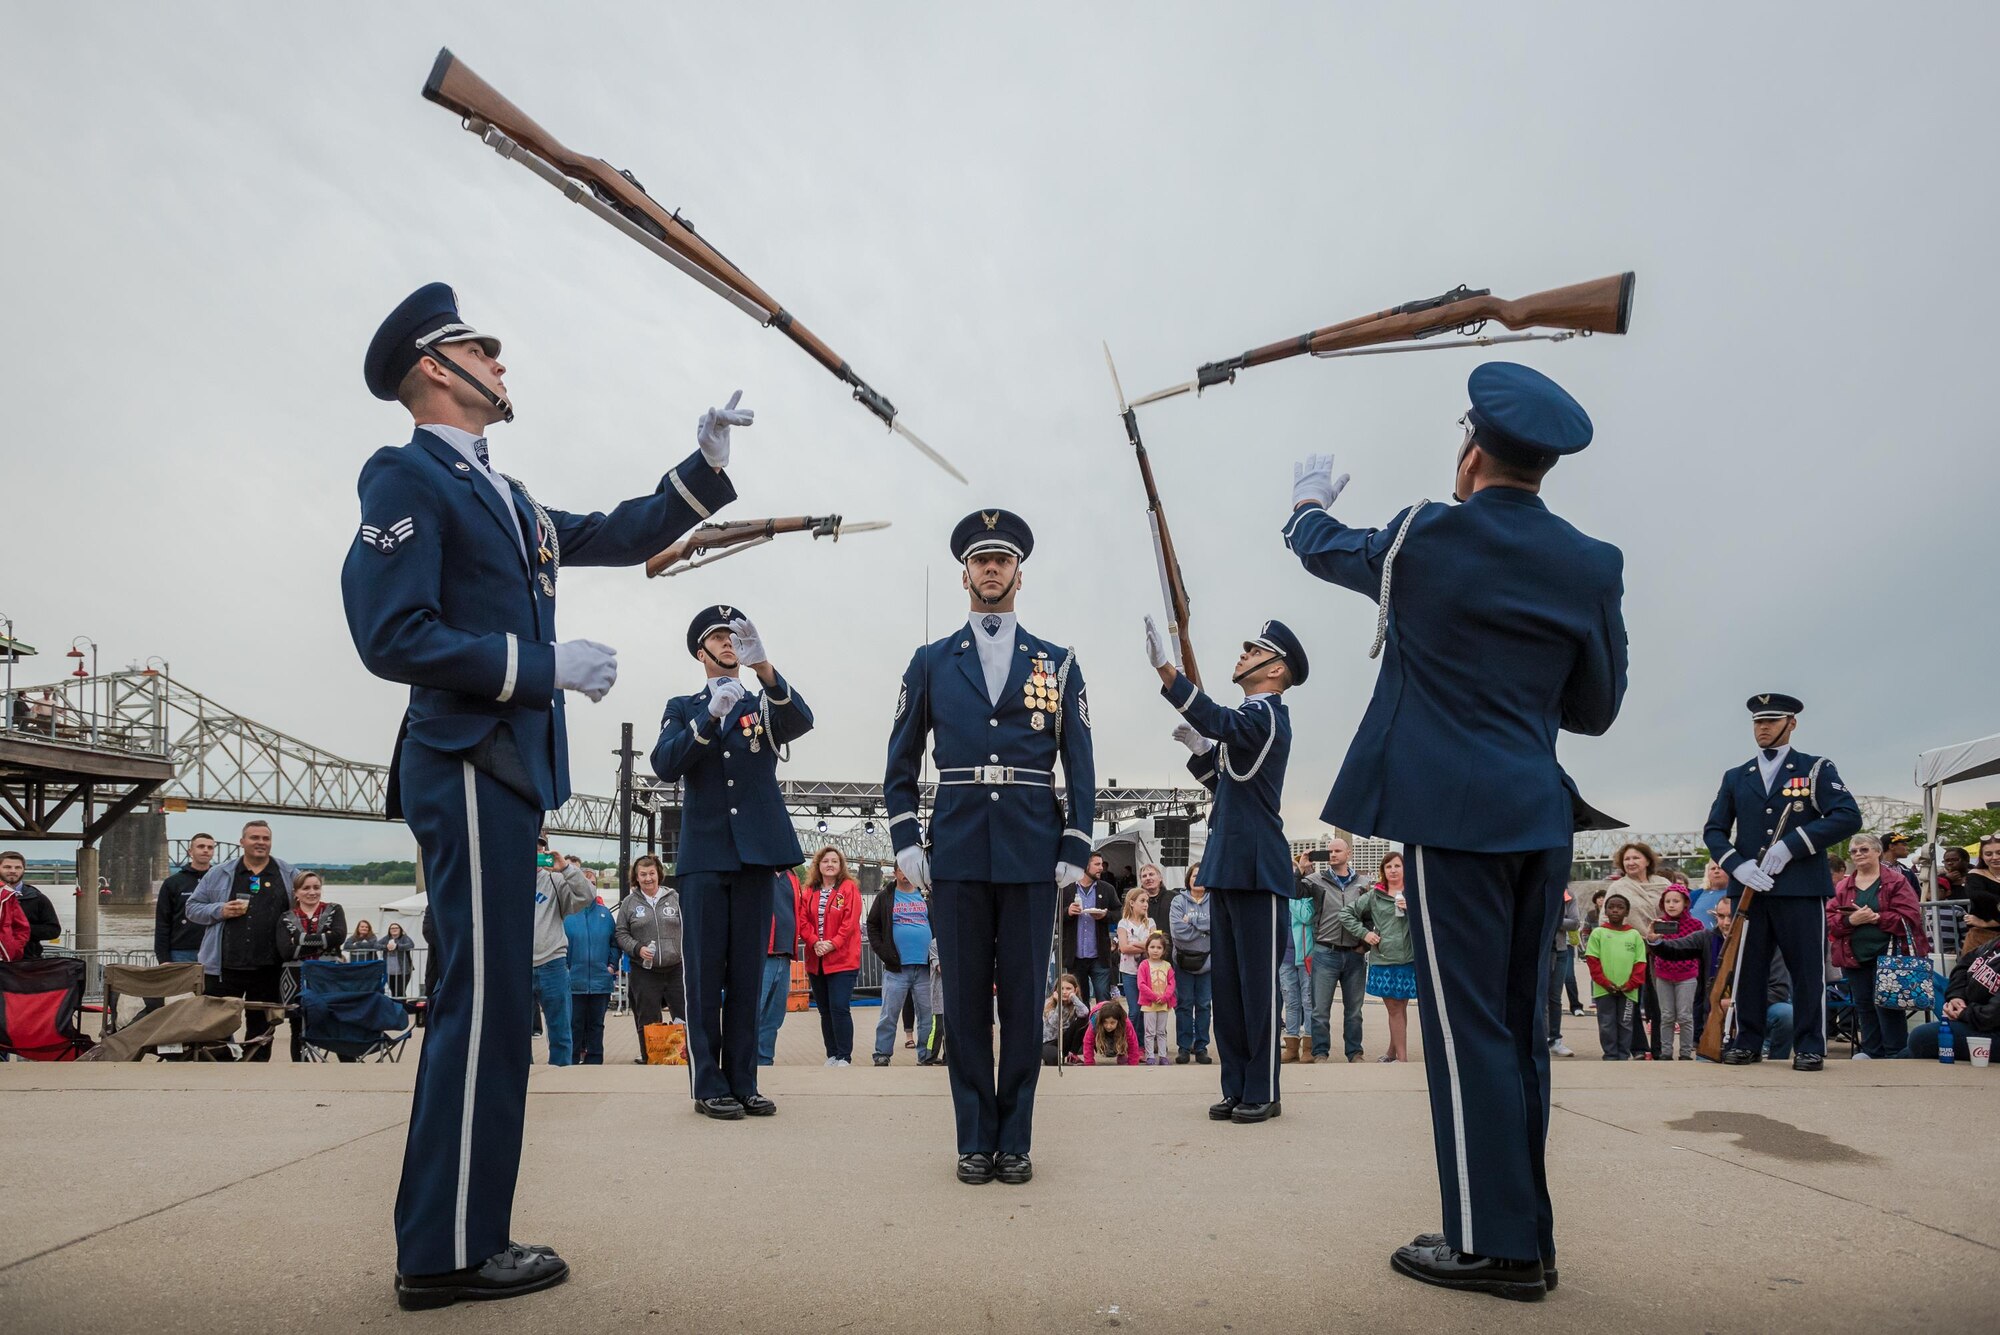 Members of the U.S. Air Force Honor Guard execute a precision rifle drill before an appreciative crowd at Waterfront Park in downtown Louisville, Ky., May 3, 2017, as part of the Kentucky Derby Festival. The Airmen, from Joint Base Anacostia-Bolling in Washington, D.C., strive to represent the Air Force Core Values of integrity, service and excellence through precise drill movements, immaculate appearance and extreme attention to detail. (U.S. Air National Guard photo by Lt. Col. Dale Greer)